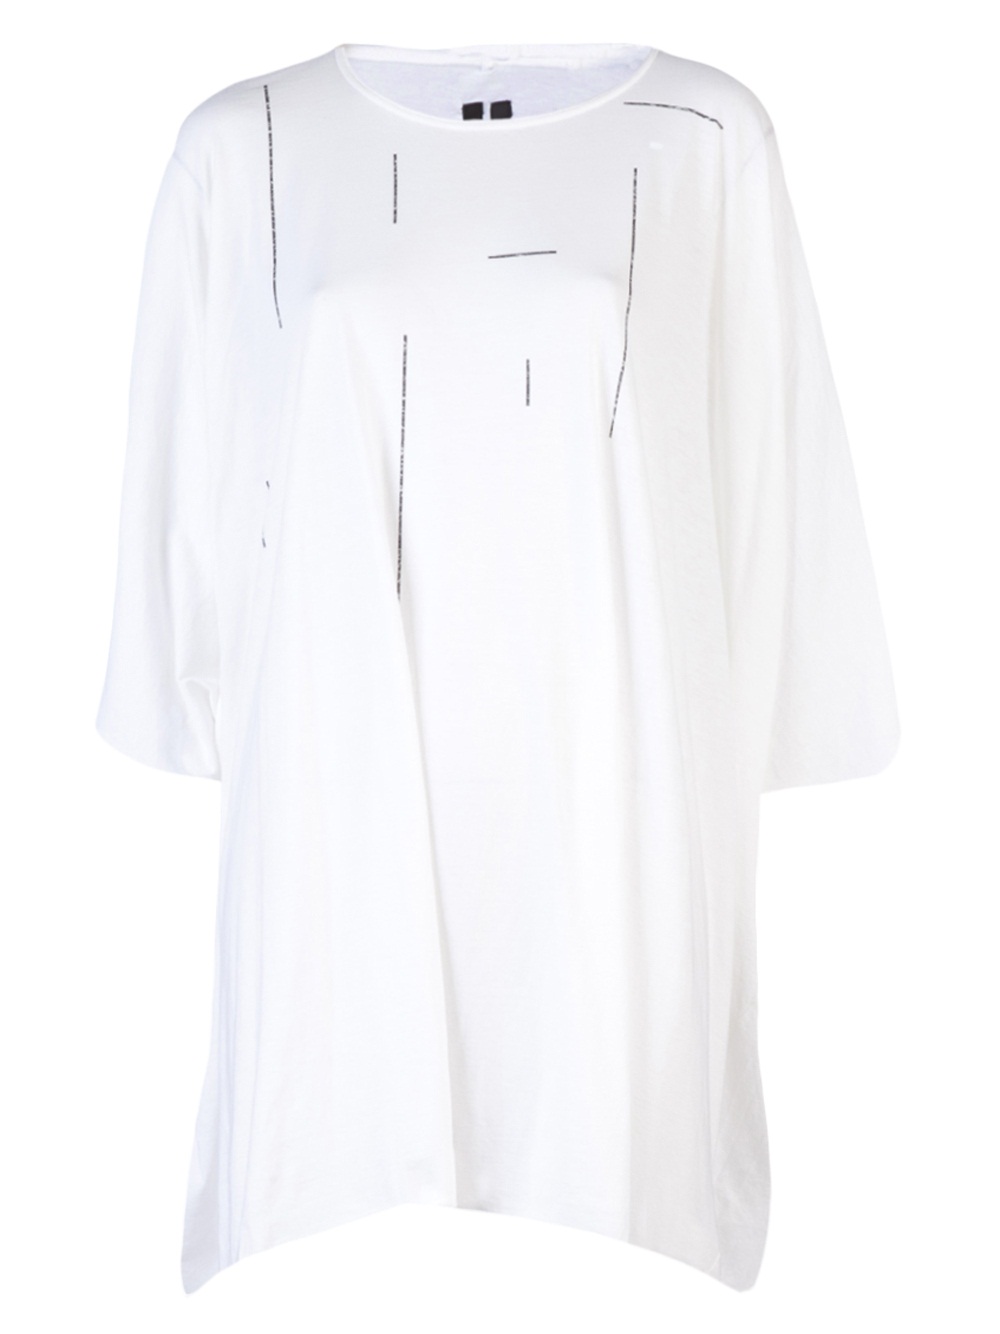 Drkshdw by rick owens Chiton Tunic in White | Lyst